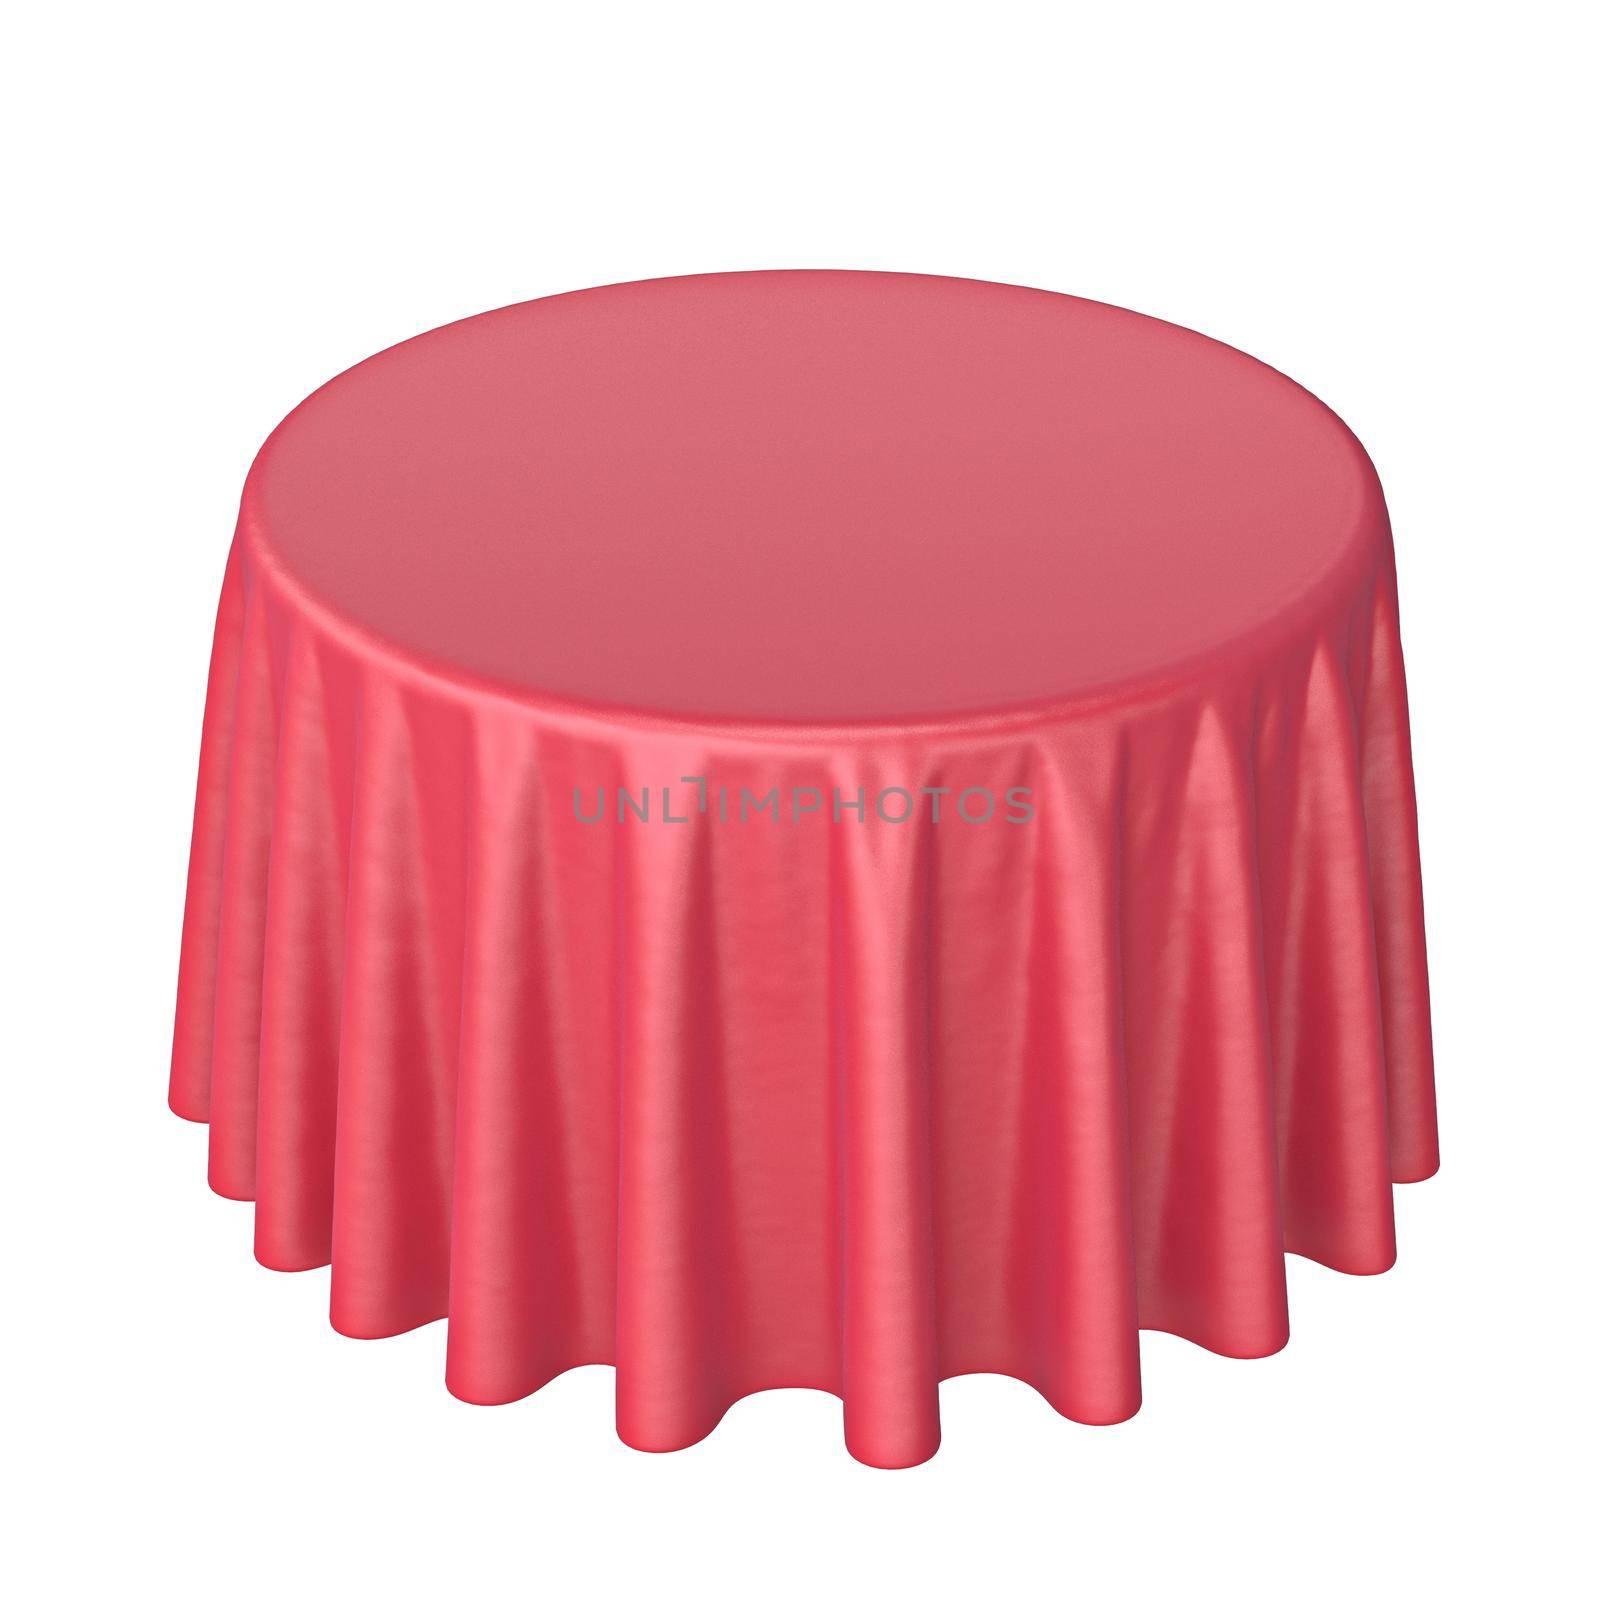 Red round tablecloth 3D rendering illustration isolated on white background